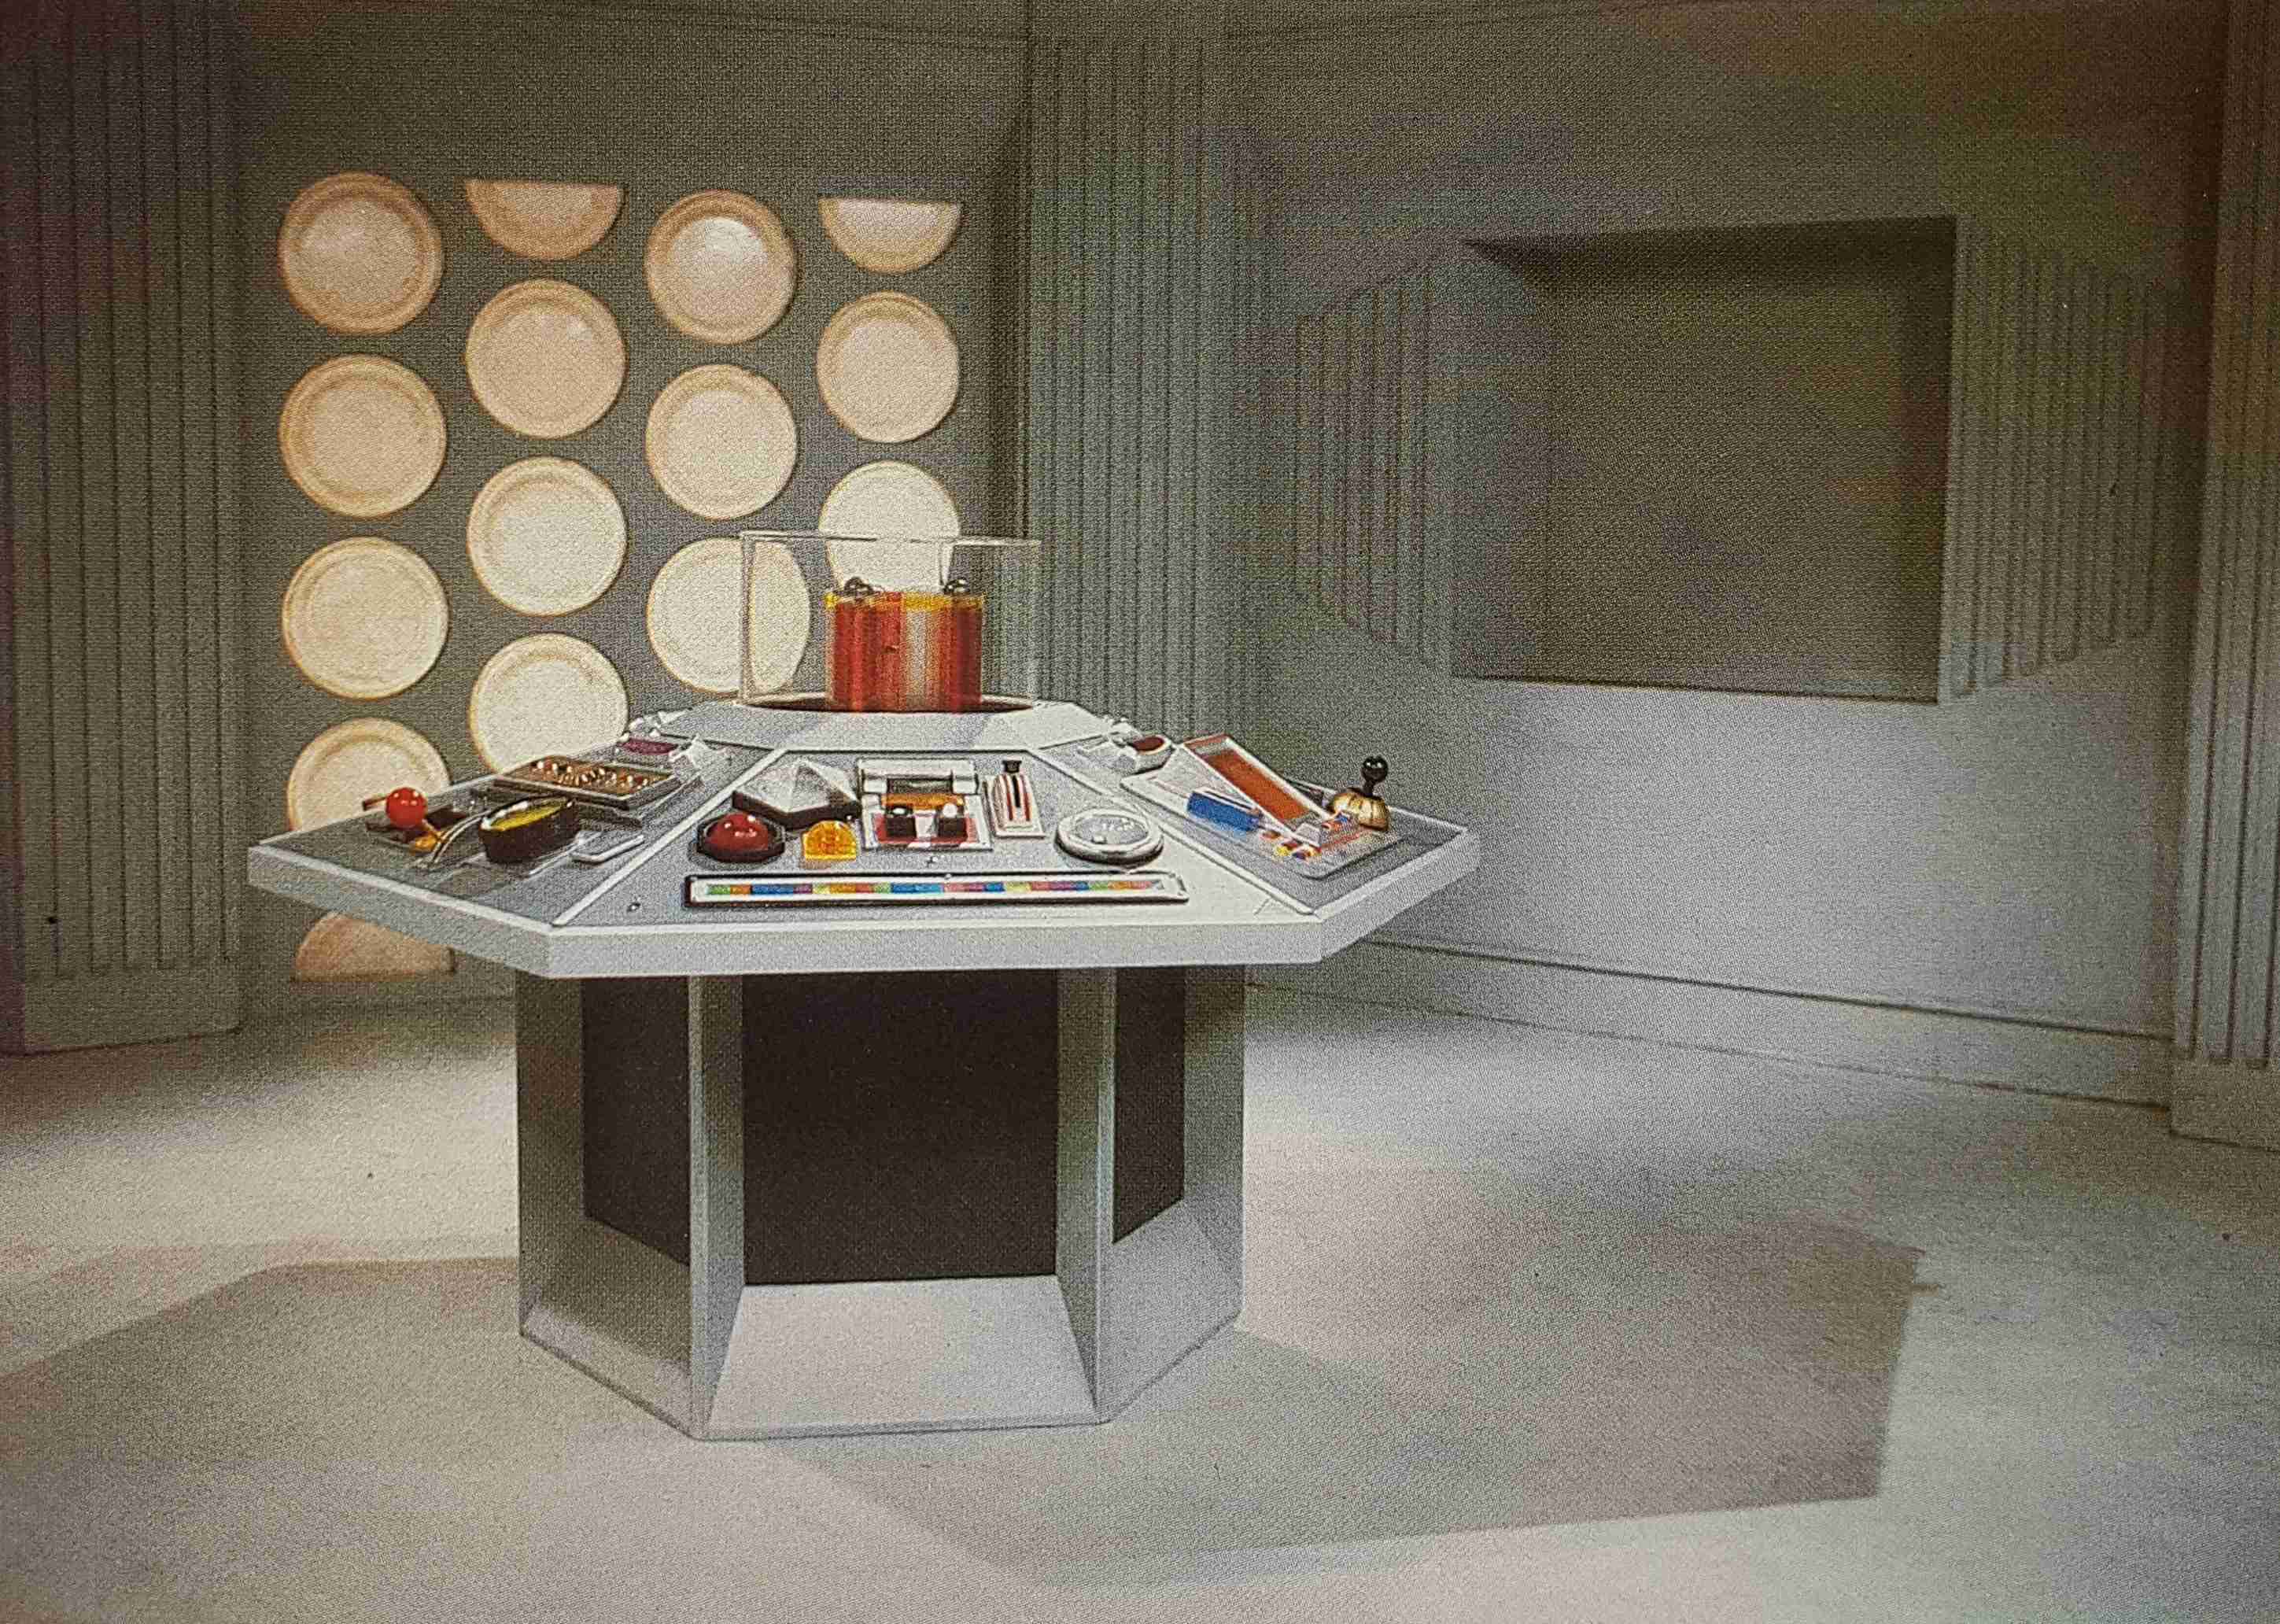 Picture of Doctor Who - Tardis console by artist Unknown from the BBC postcards - Records and Tapes library